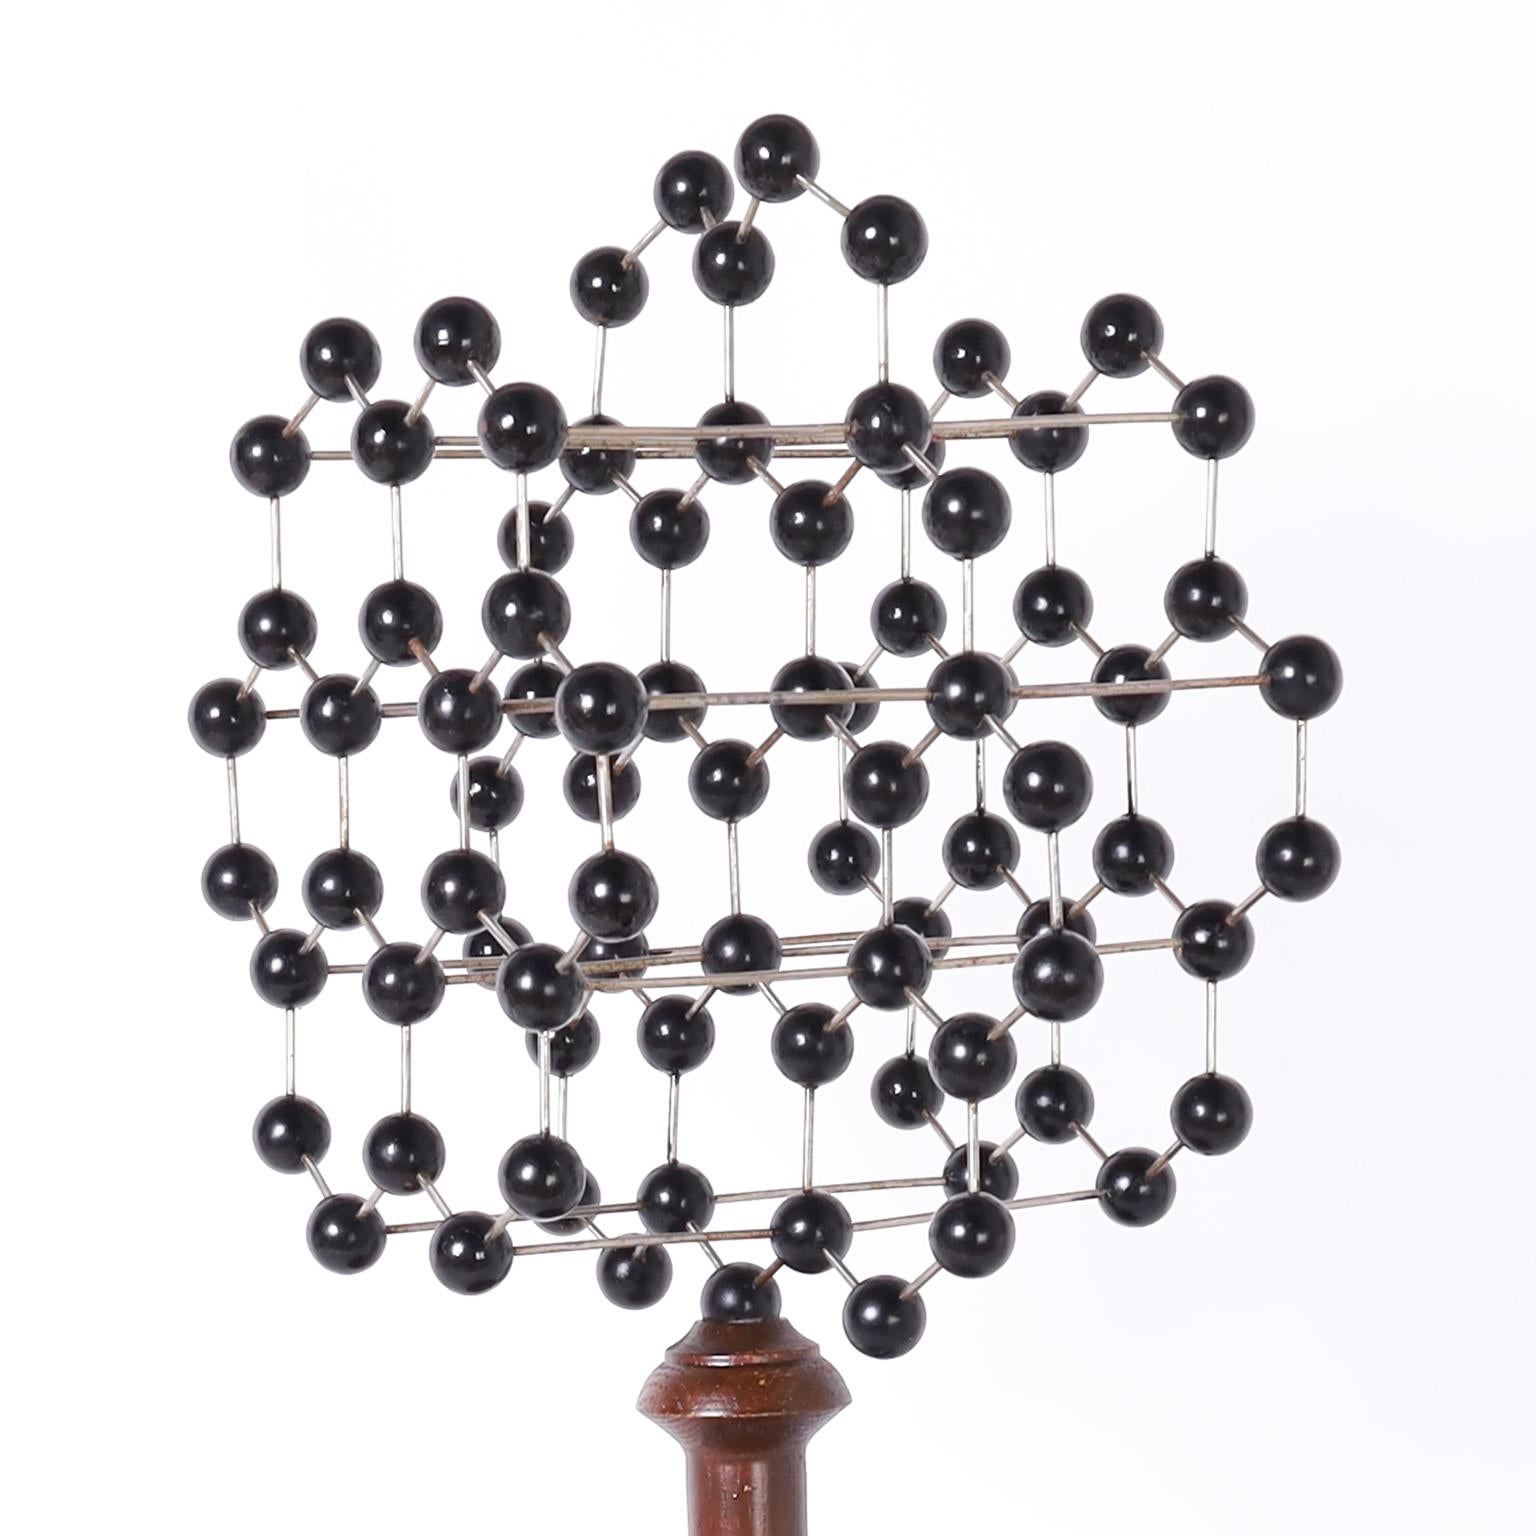 Academic style molecular structure model crafted with painted wood balls strung with metal rods and presented on a classic turned wood base. 
